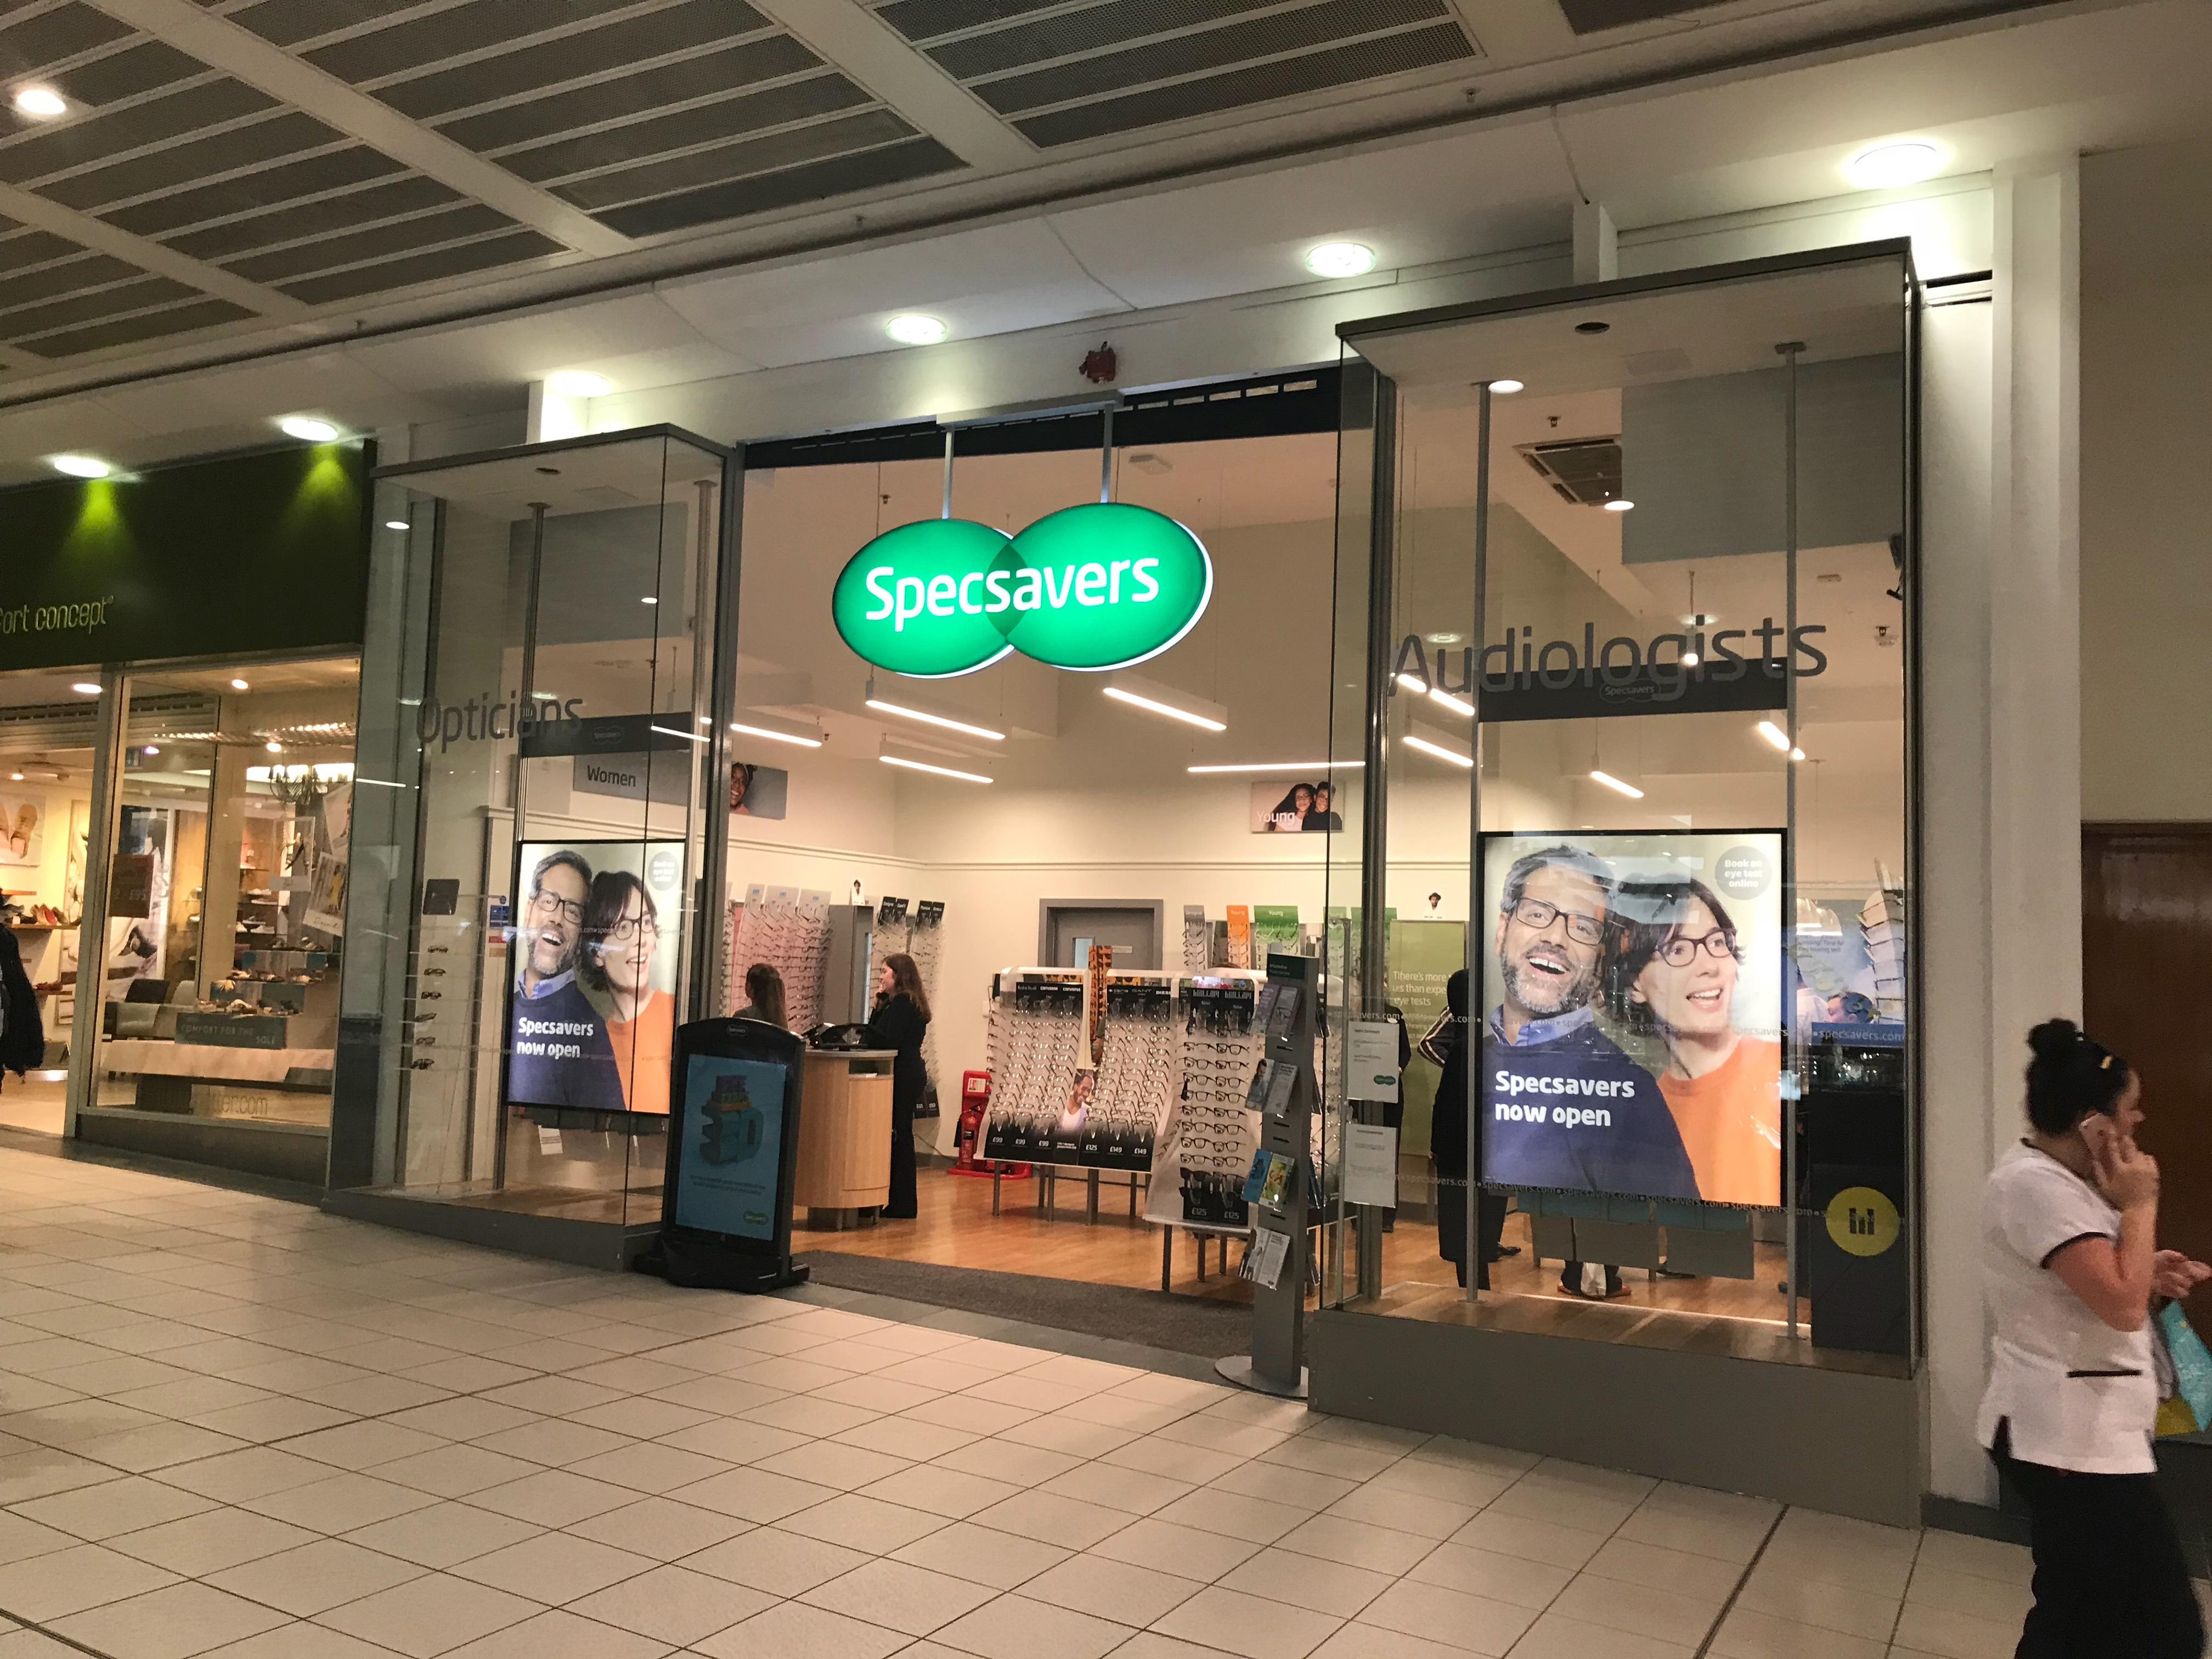 Specsavers Opticians and Audiologists - Sauchiehall Street Specsavers Opticians and Audiologists - Sauchiehall Street Glasgow 01413 414940